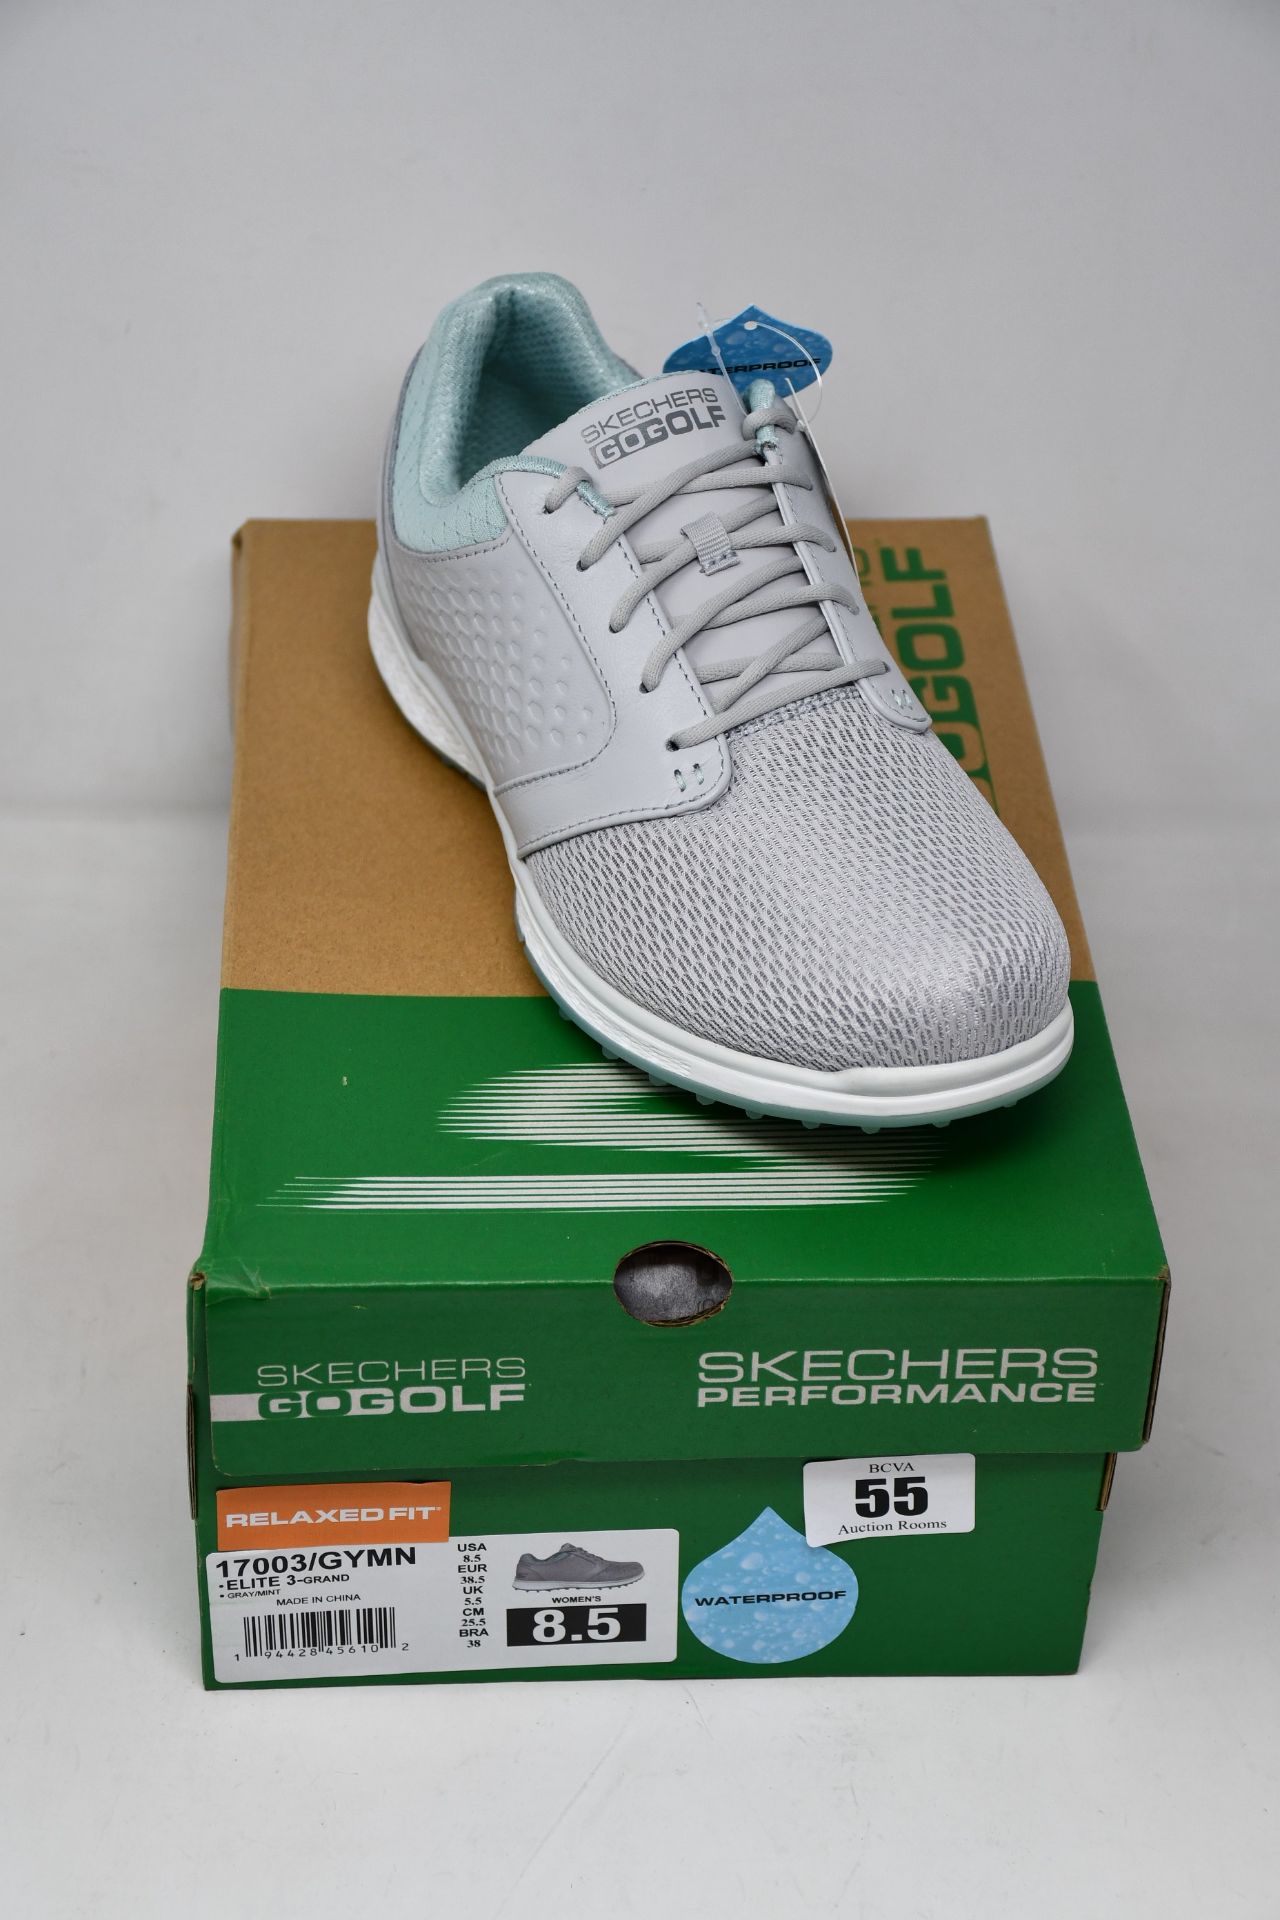 A pair of women's as new Skechers Go Golf Elite 3 Grand shoes (UK 5.5).